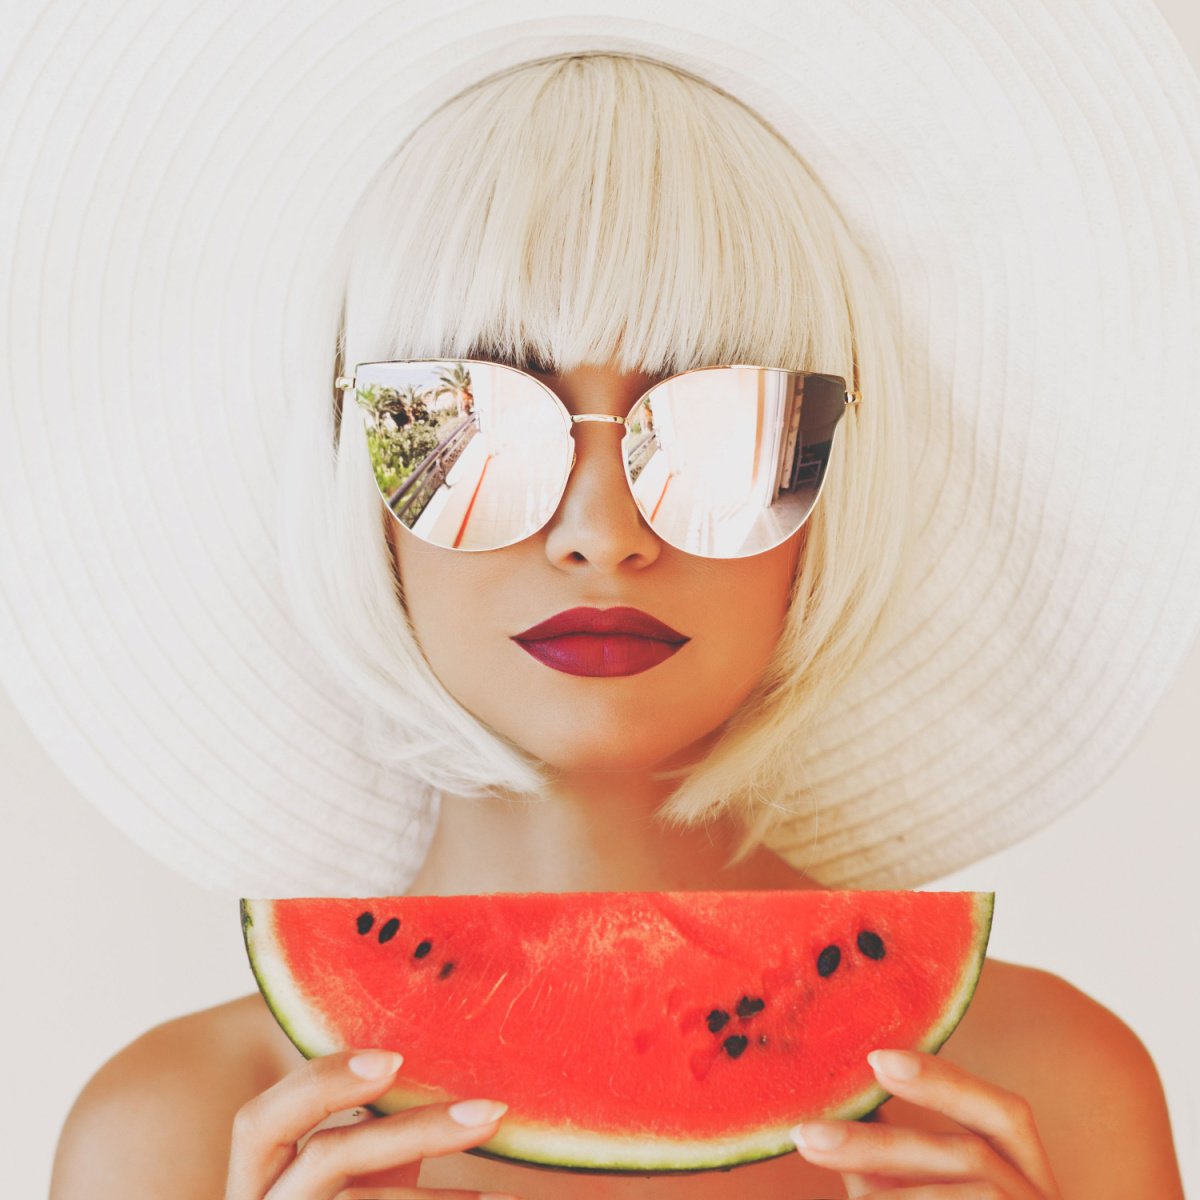 a pretty woman wearing sunglasses and a hat is eating a watermelon slice